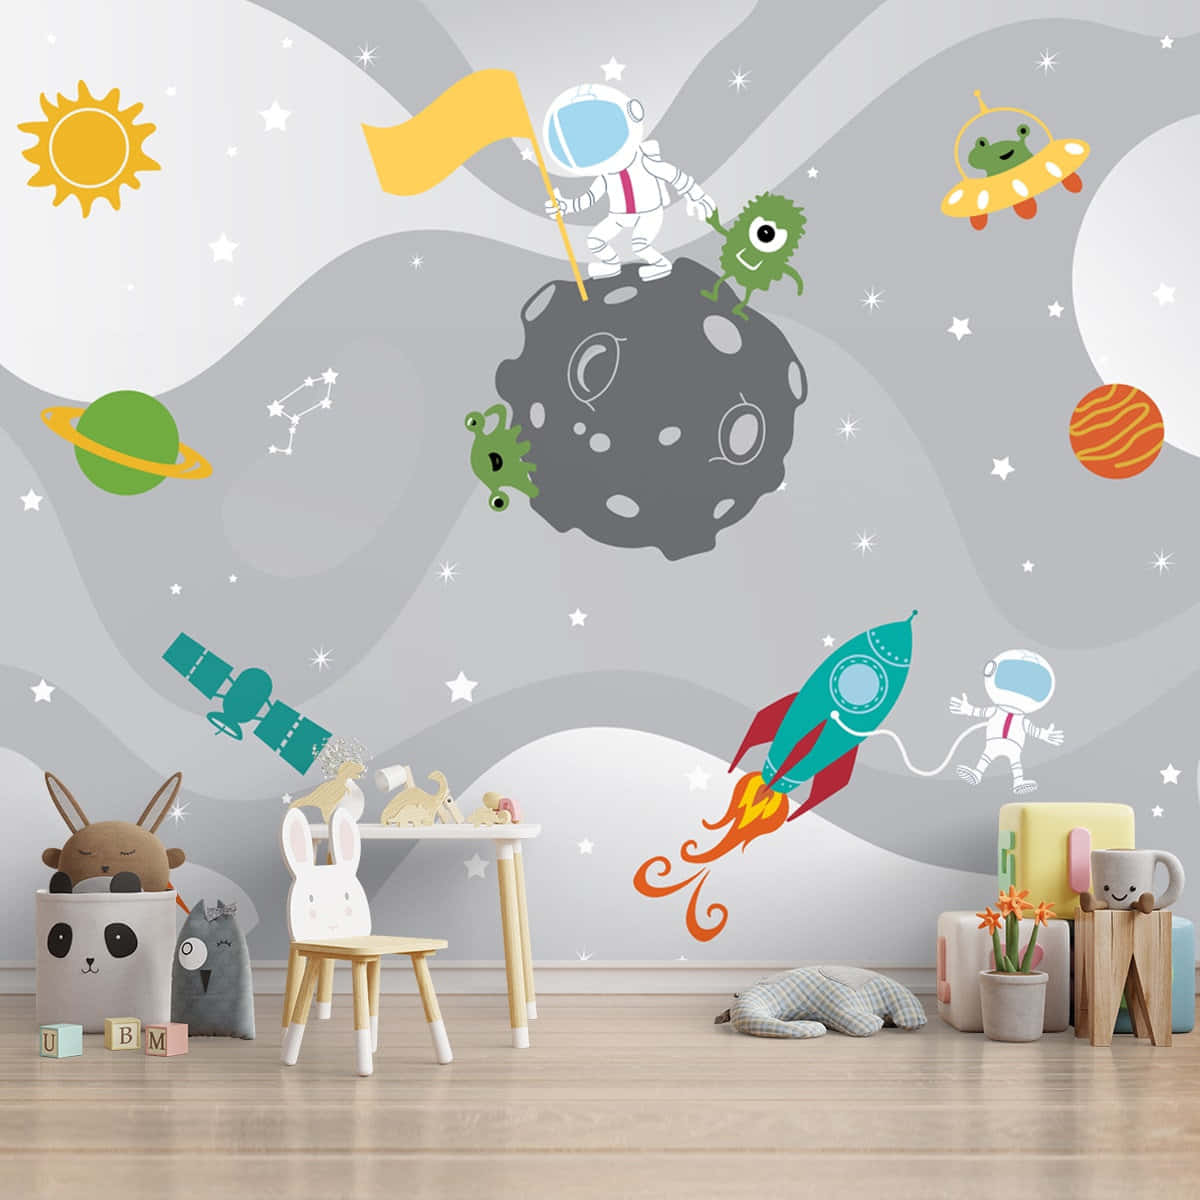 Travel Across Galaxies With This Ultra-cute Astronaut! Background